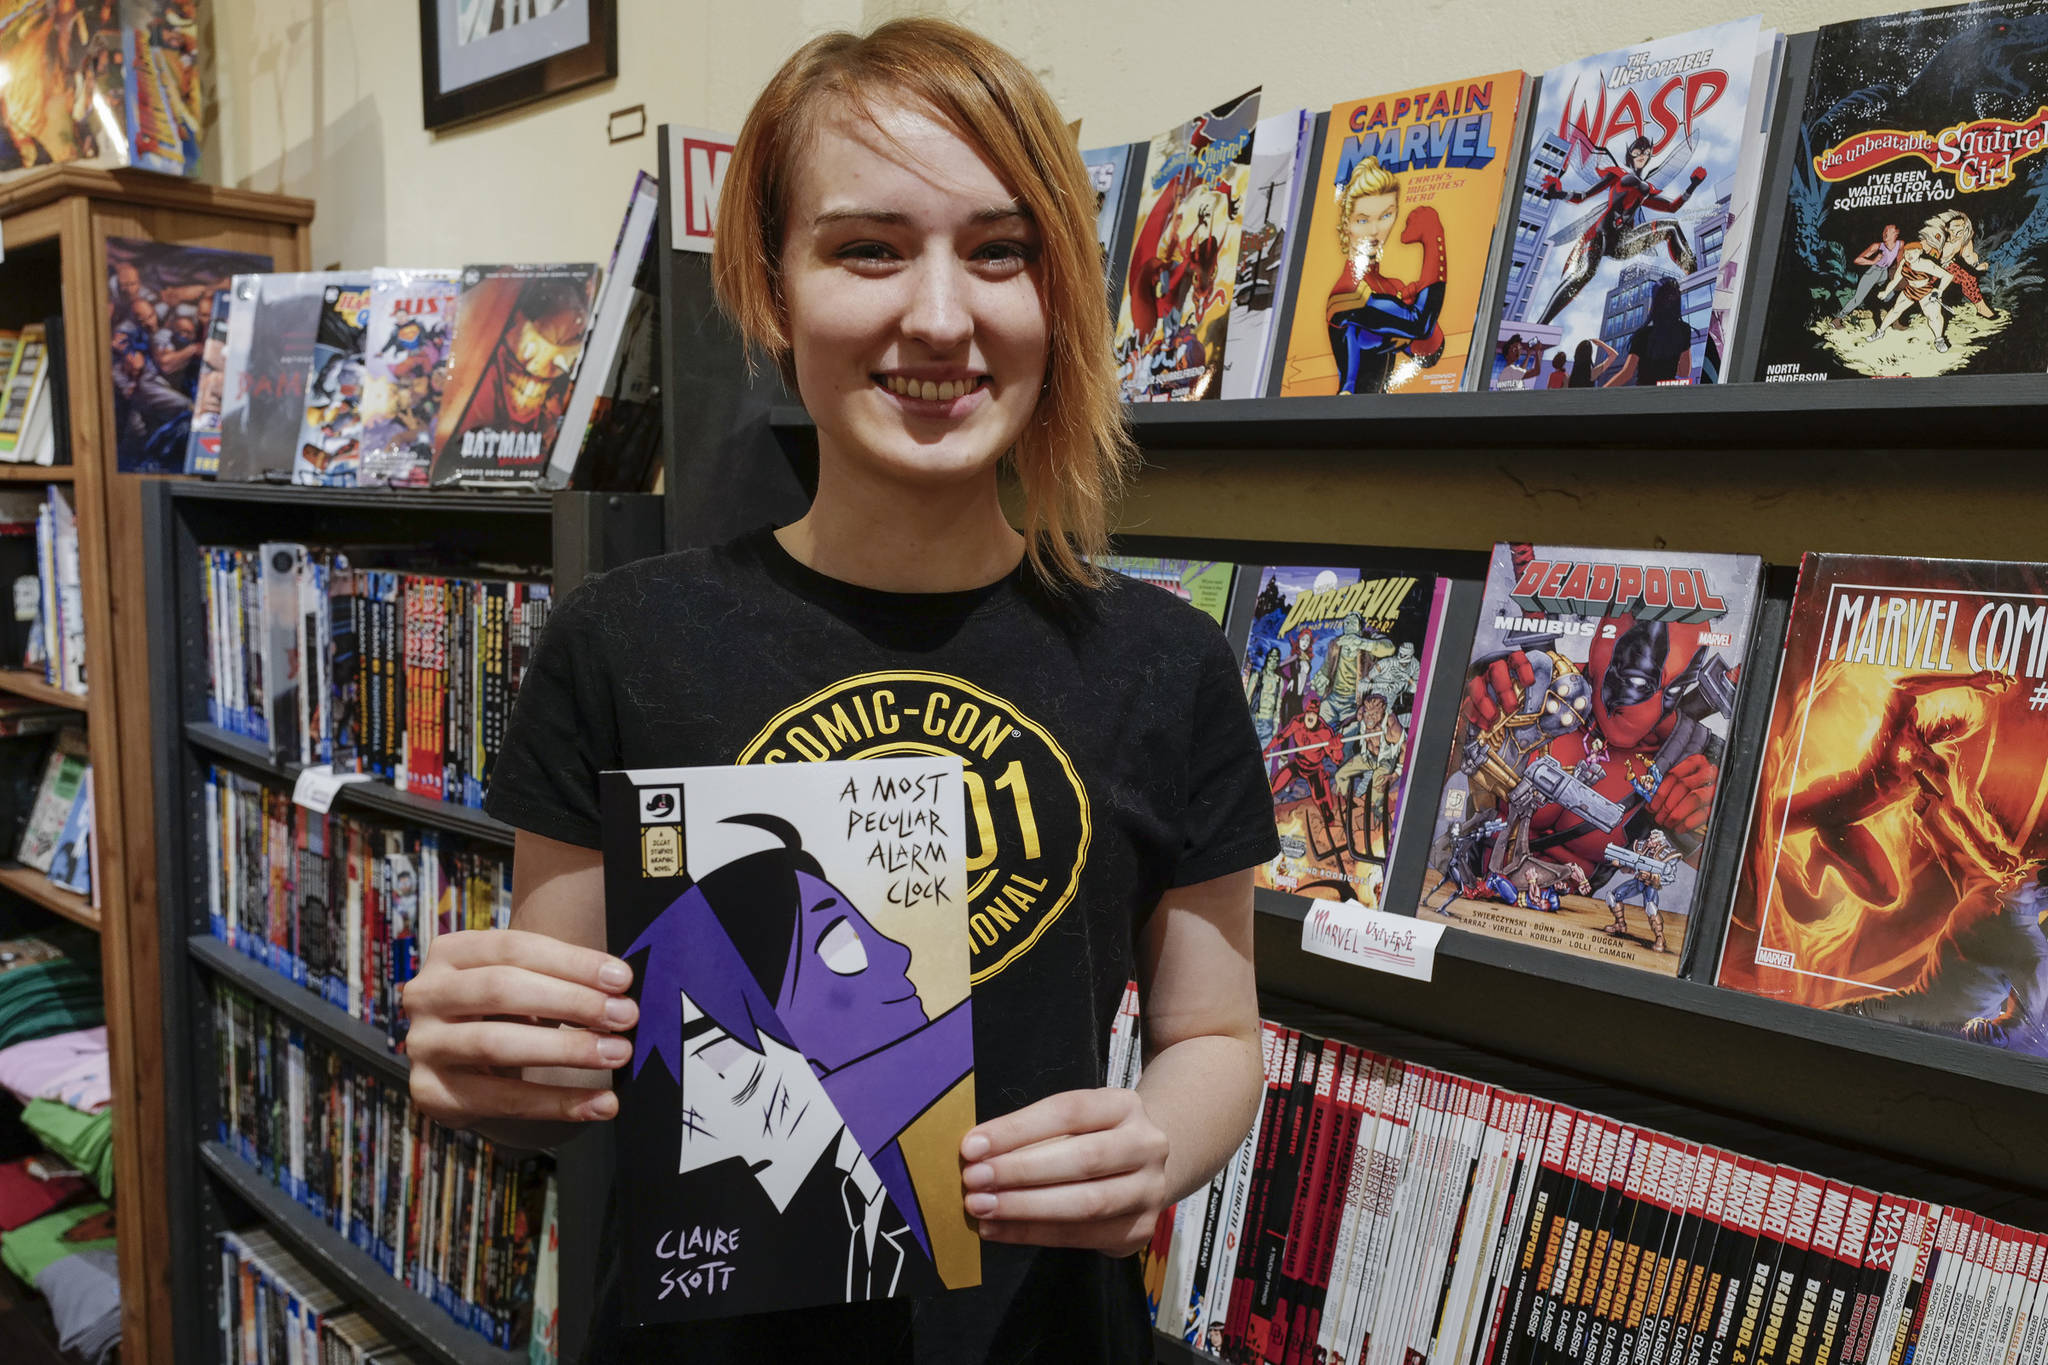 Claire Scott, 16, a junior at Juneau-Douglas High School: Yadaa.at Kalé, shows off her second published comic book, A Most Peculiar Alarm Clock, at Alaska Robotics Gallery on Tuesday, Nov. 12, 2019. Learn more by watching the video below. (Michael Penn | Juneau Empire)